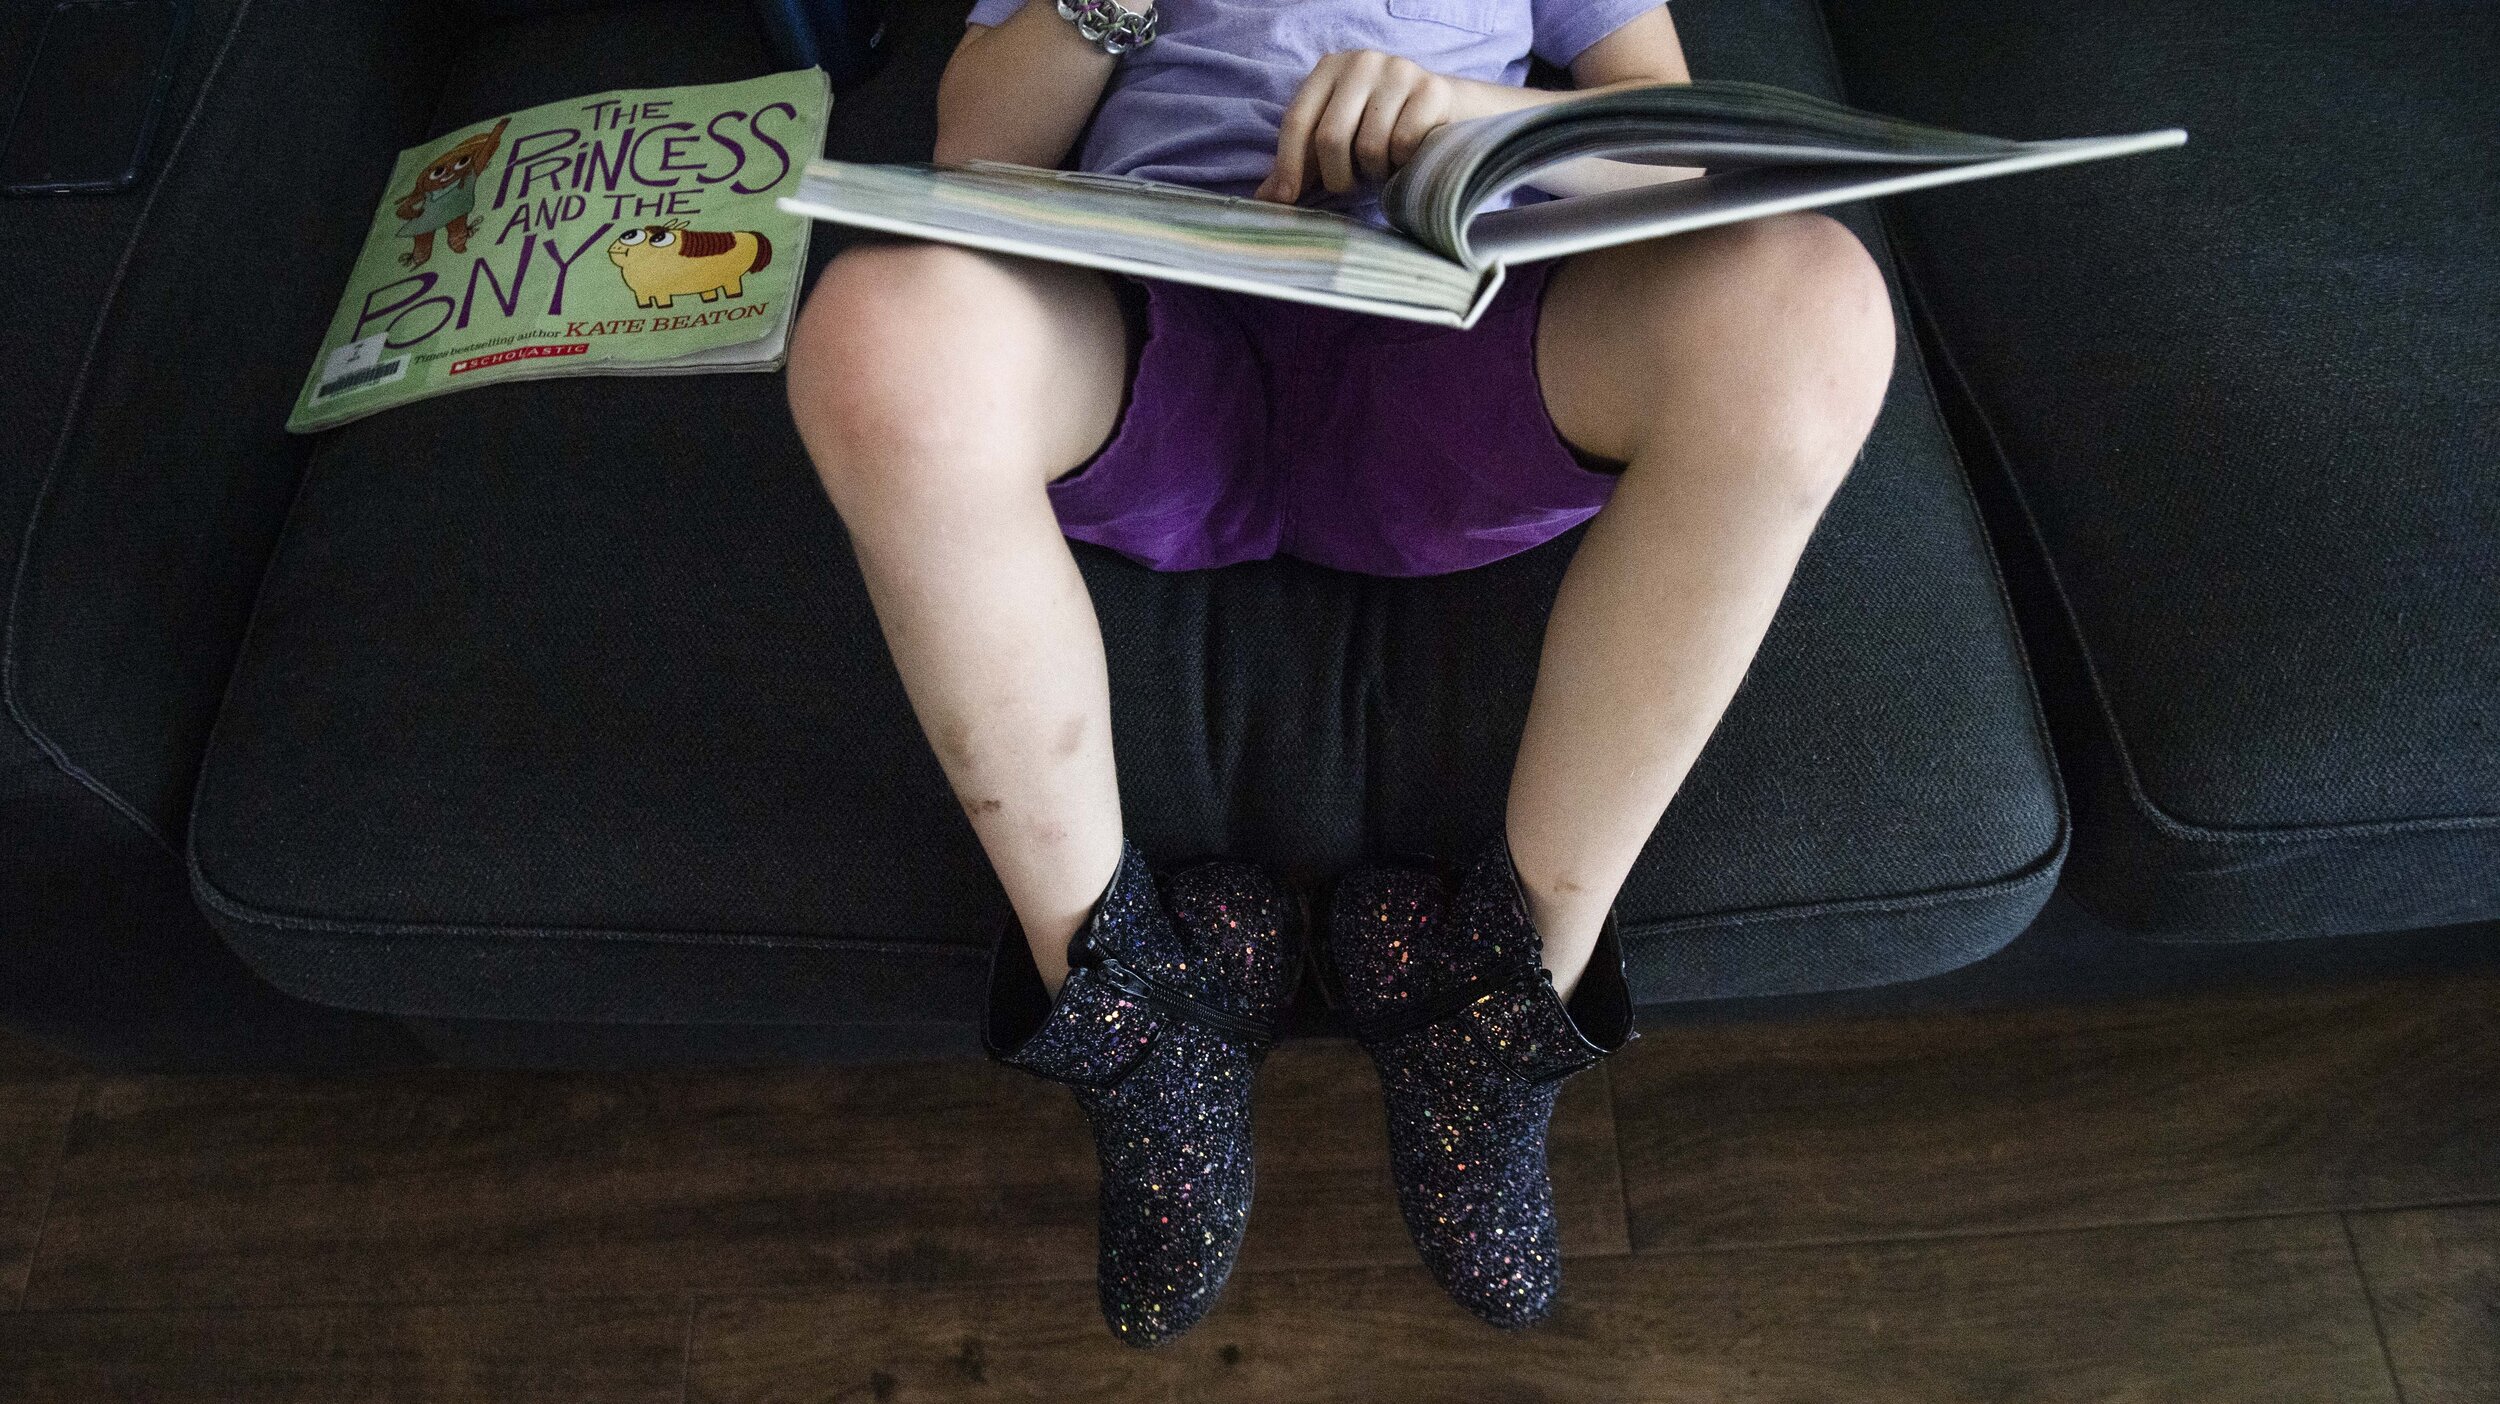  Keegan, a gender creative child, then 8, reads at home in Austin, Texas, U.S., April 25, 2019.  Keegan's favorite book is 'Prince + The Dressmaker'. His parents have also included LGBTQ children's literature to his reading list.  The objective, they